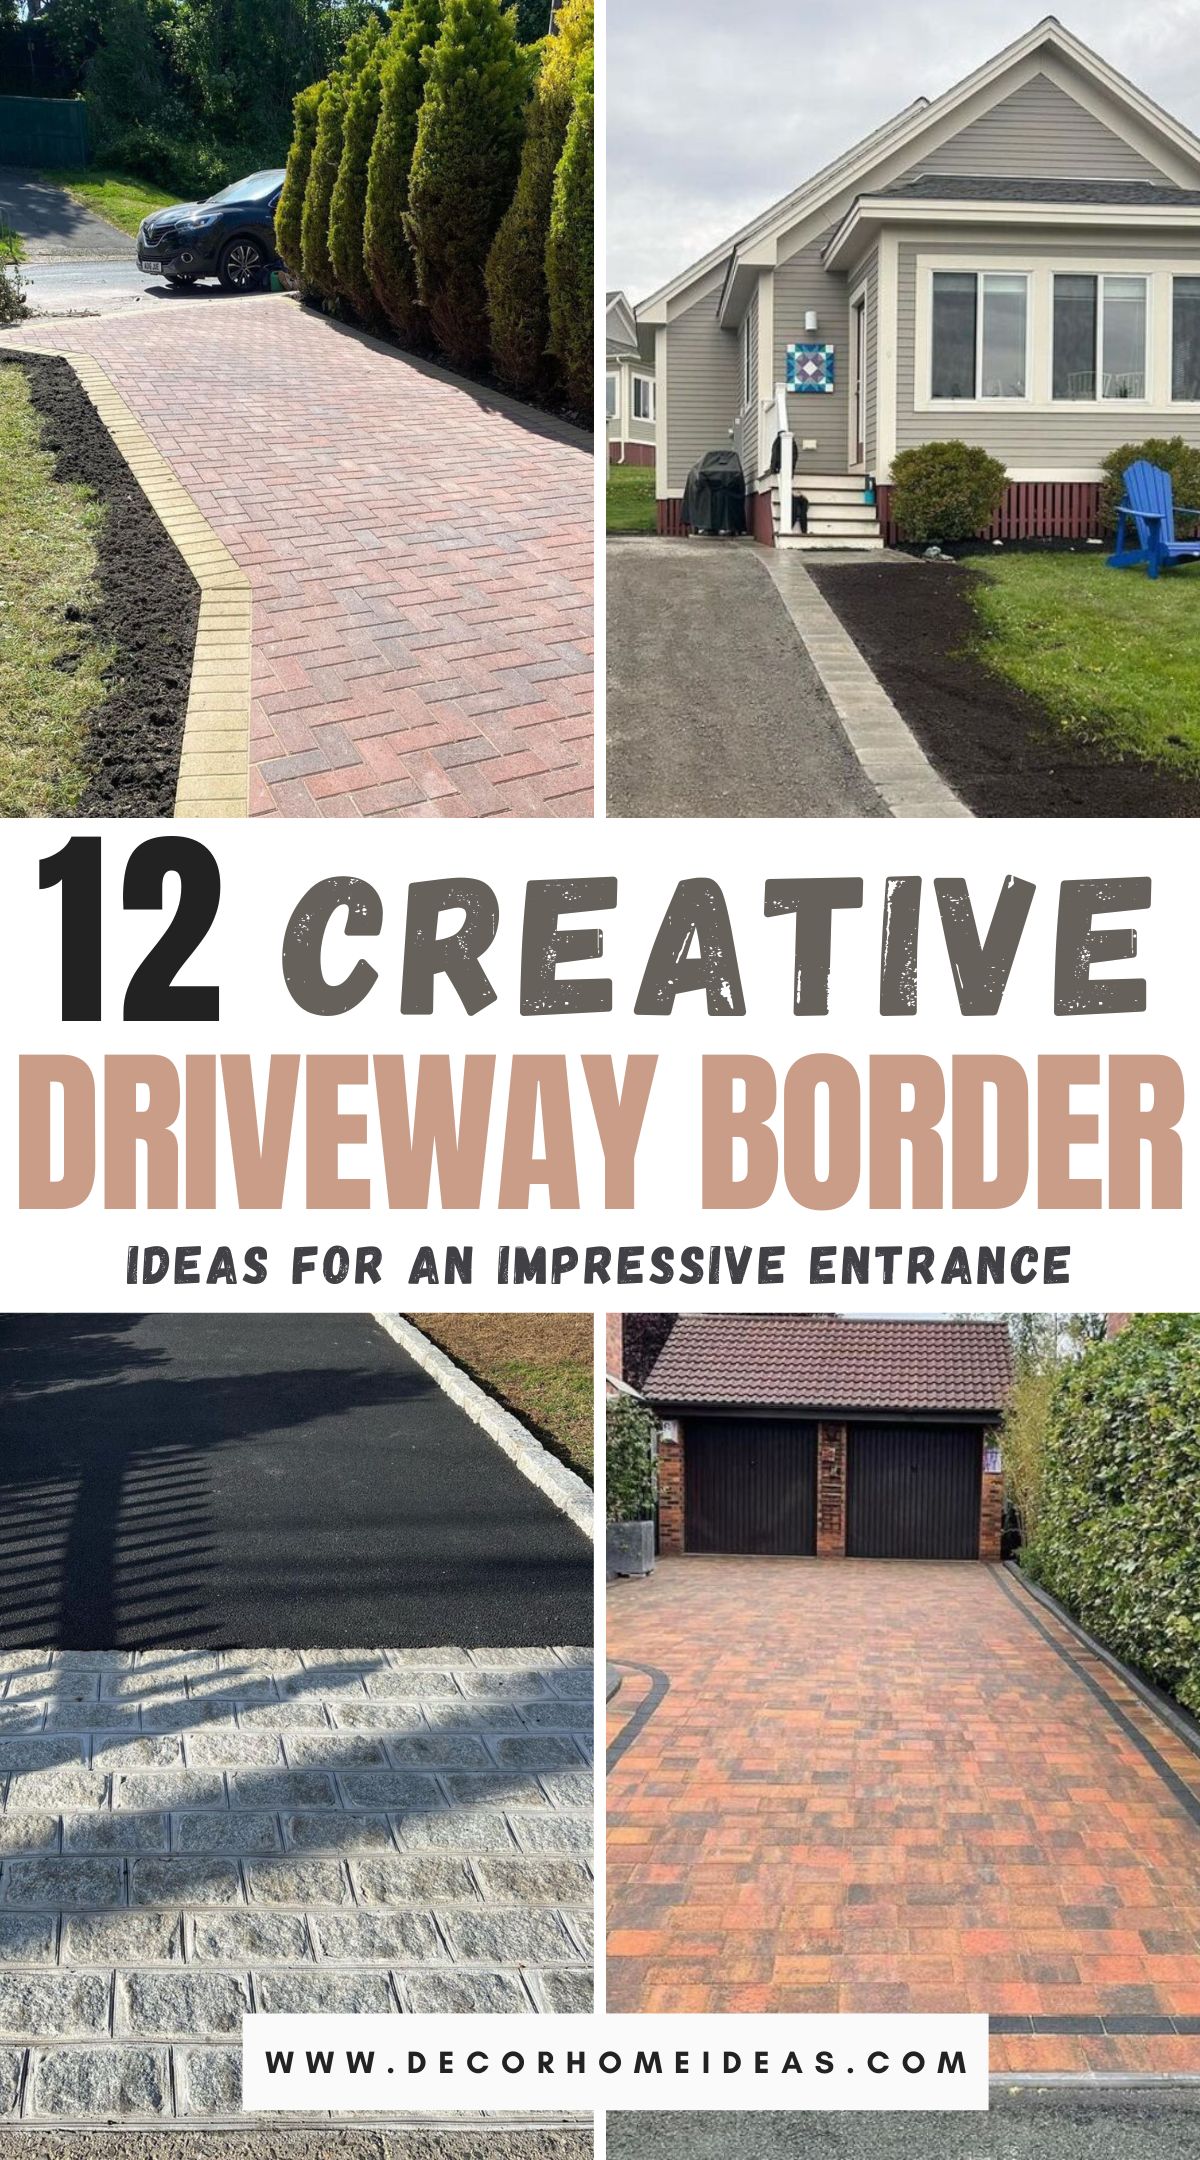 Transform your home's curb appeal with these 12 stunning driveway border ideas. From classic cobblestone to modern pavers, discover creative ways to elevate your driveway and make a lasting impression.